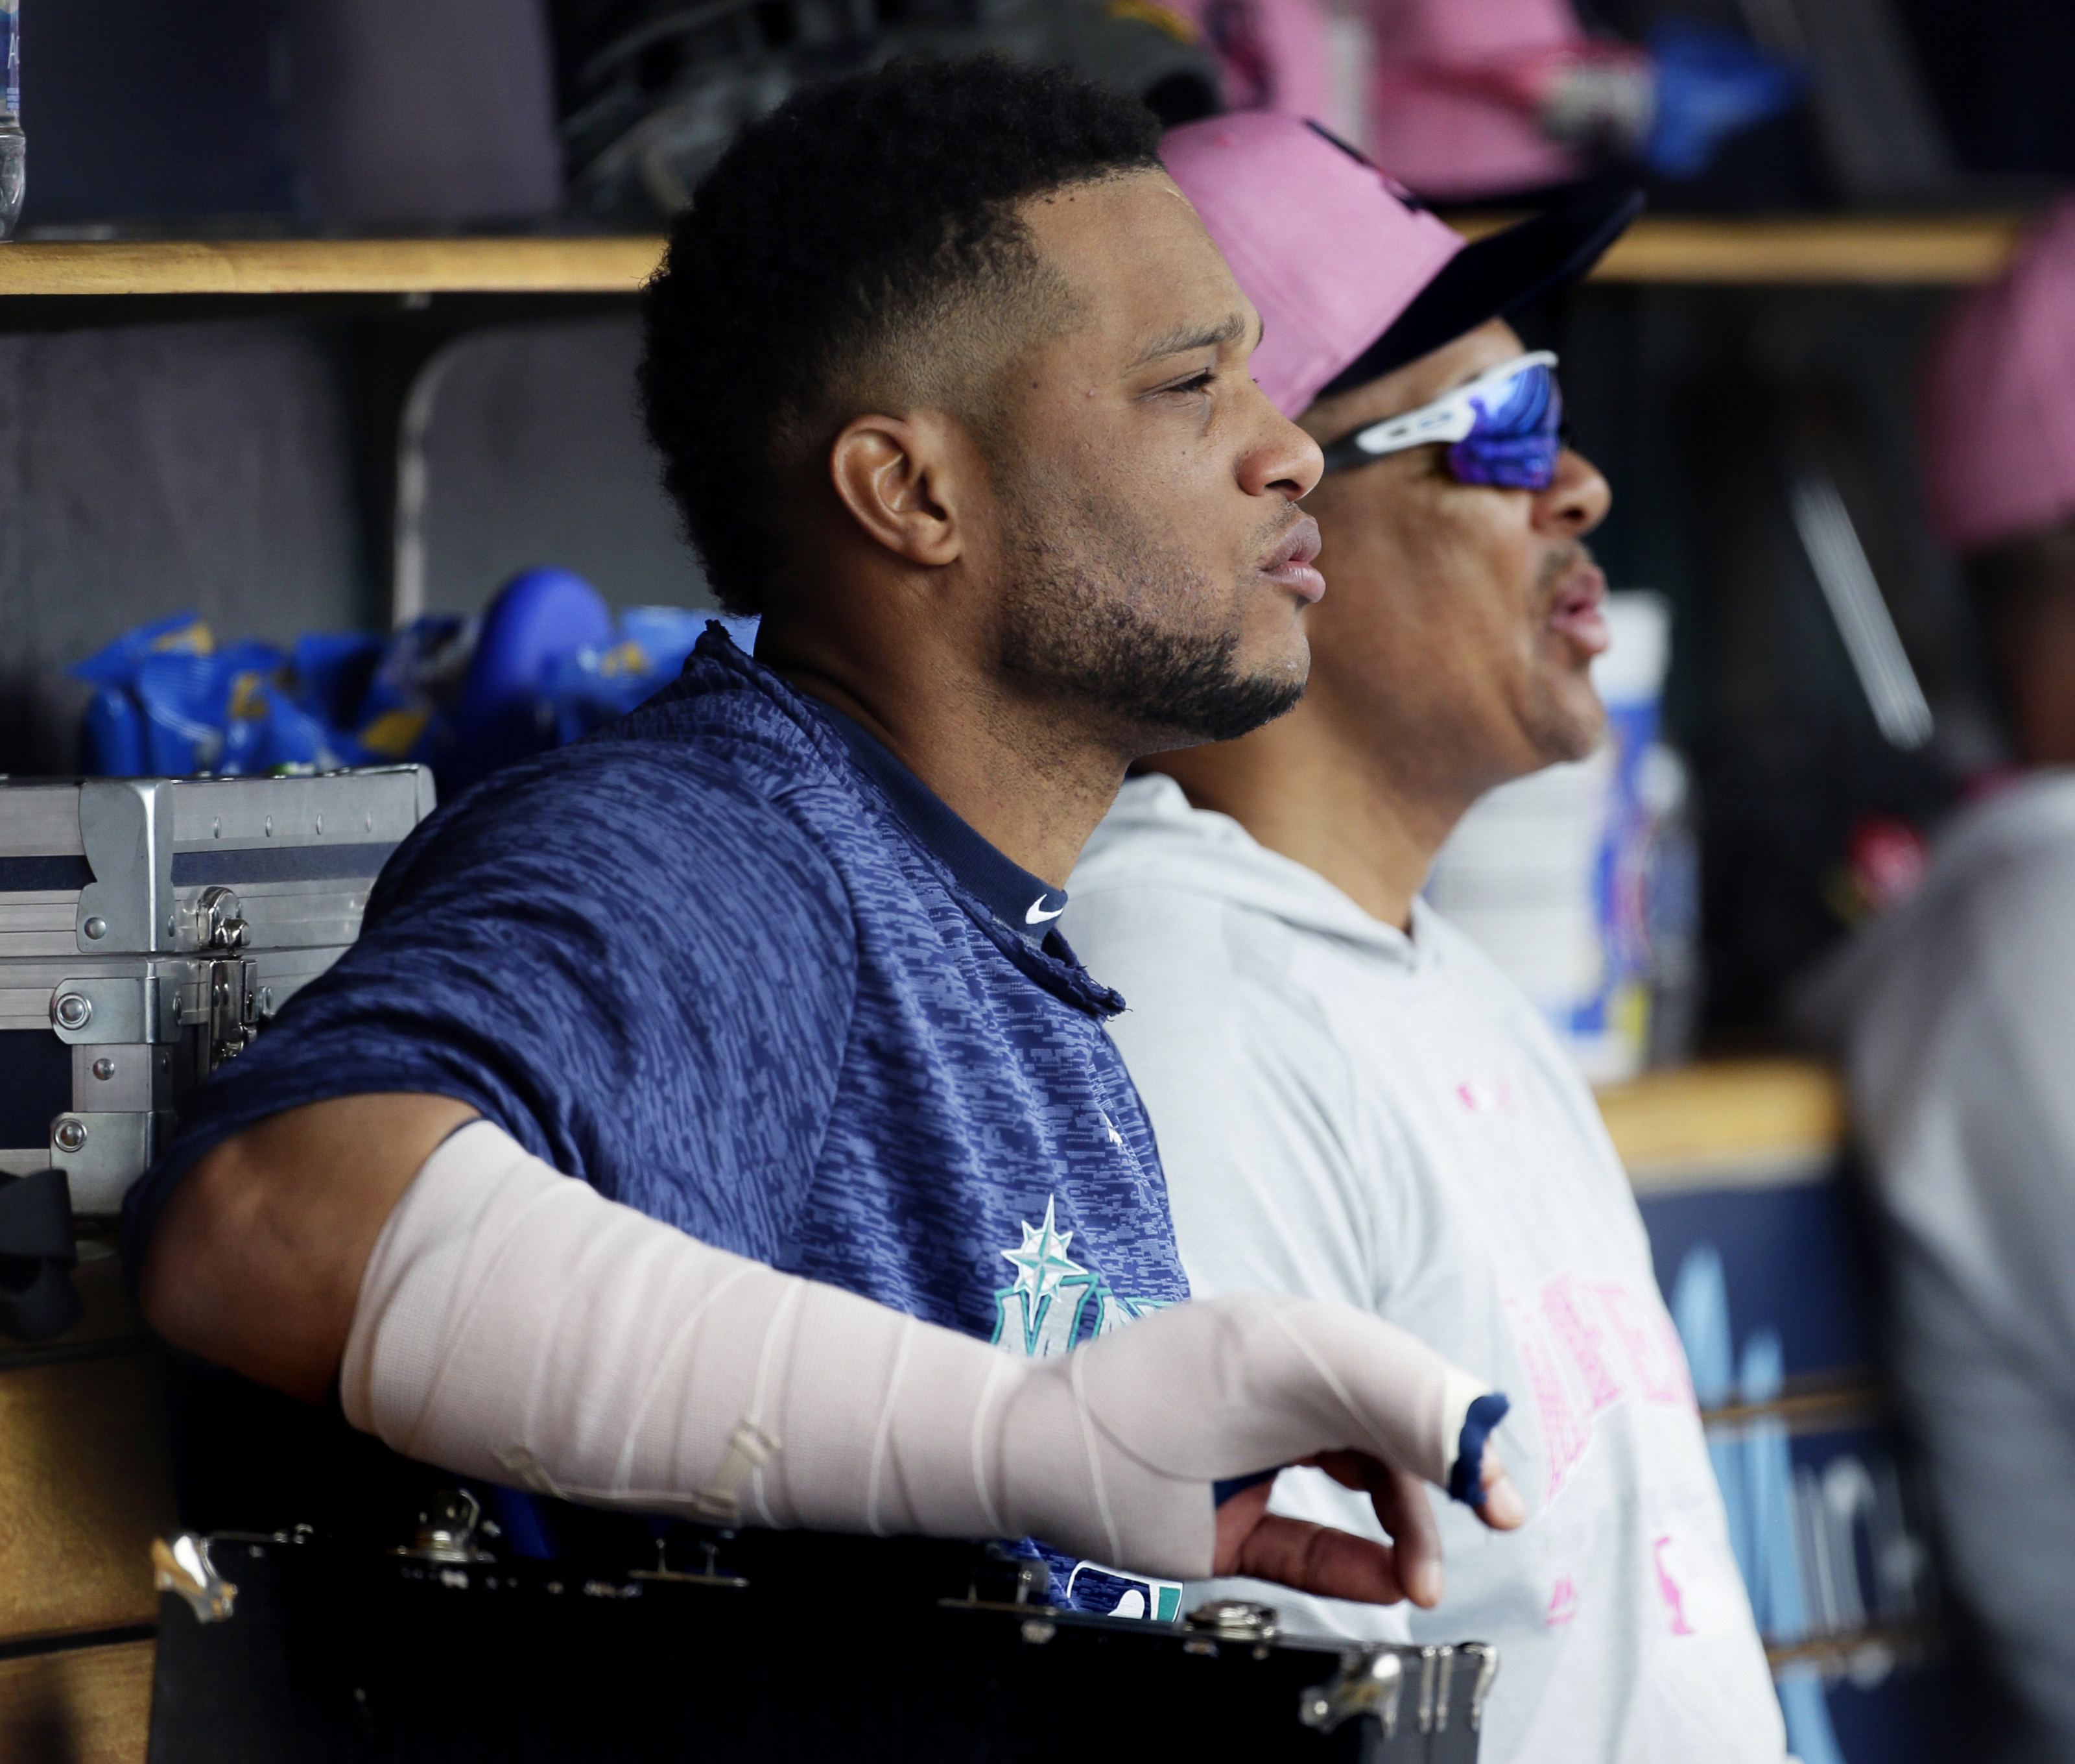 Robinson Cano A Cautionary Tale All of Baseball Must Pay Attention To